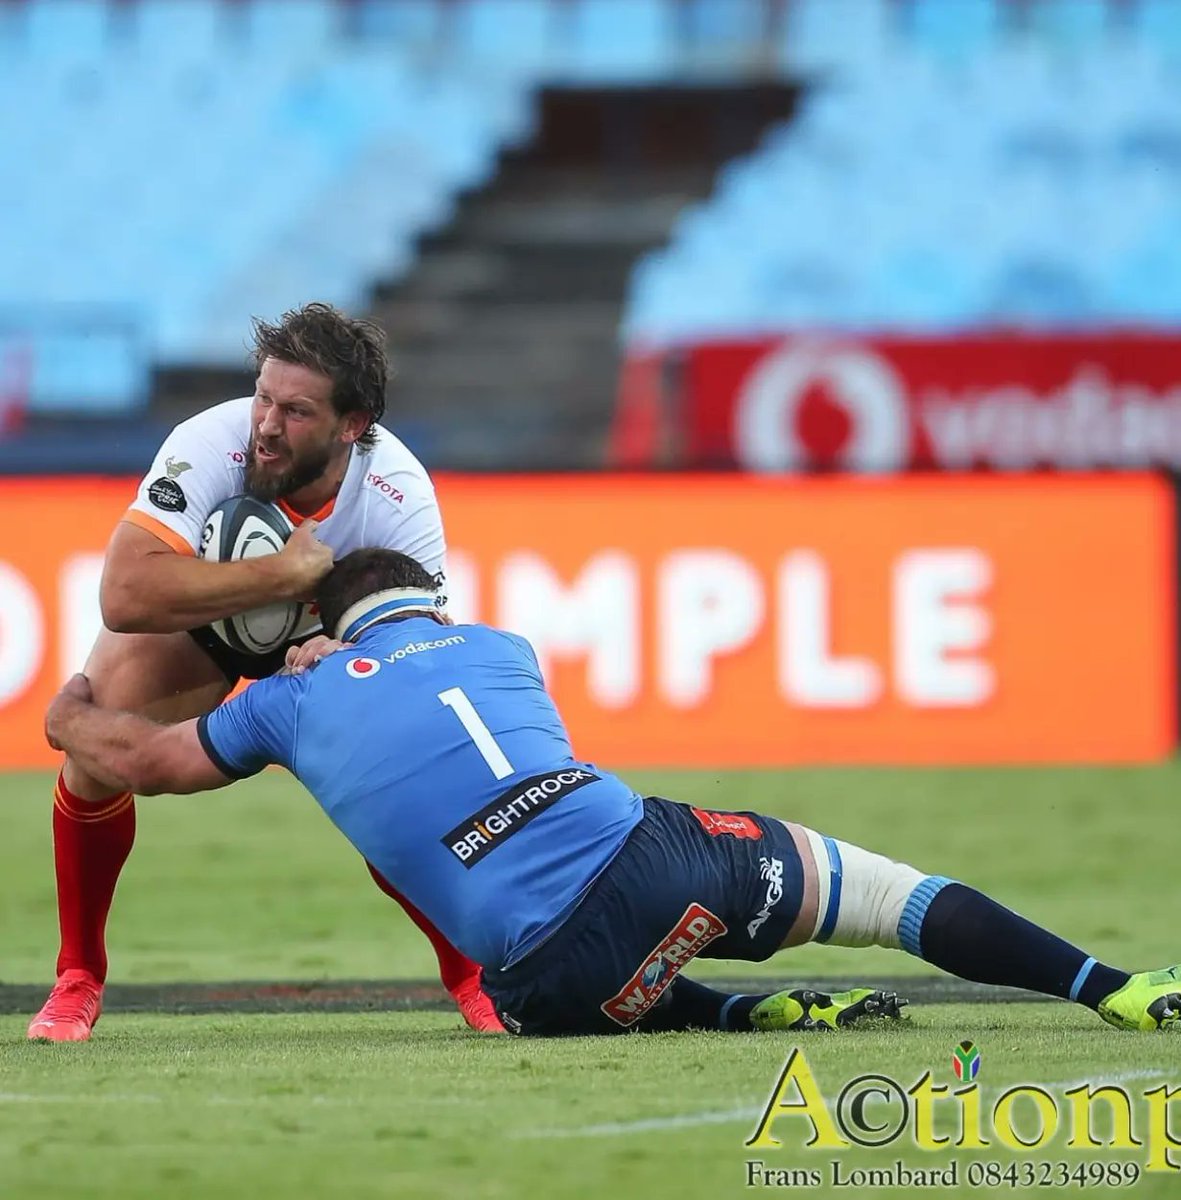 HALF-TIME | Vodacom @BlueBullsRugby 20-19 Toyota @CheetahsRugby

Tight contest!! The second half should be a good one!!

#pegasuspublishing I #BULvCHE I #CarlingCurrieCup I #ReachForGold I #TheChampionWithin I @Actionpixsa I @TheCurrieCup